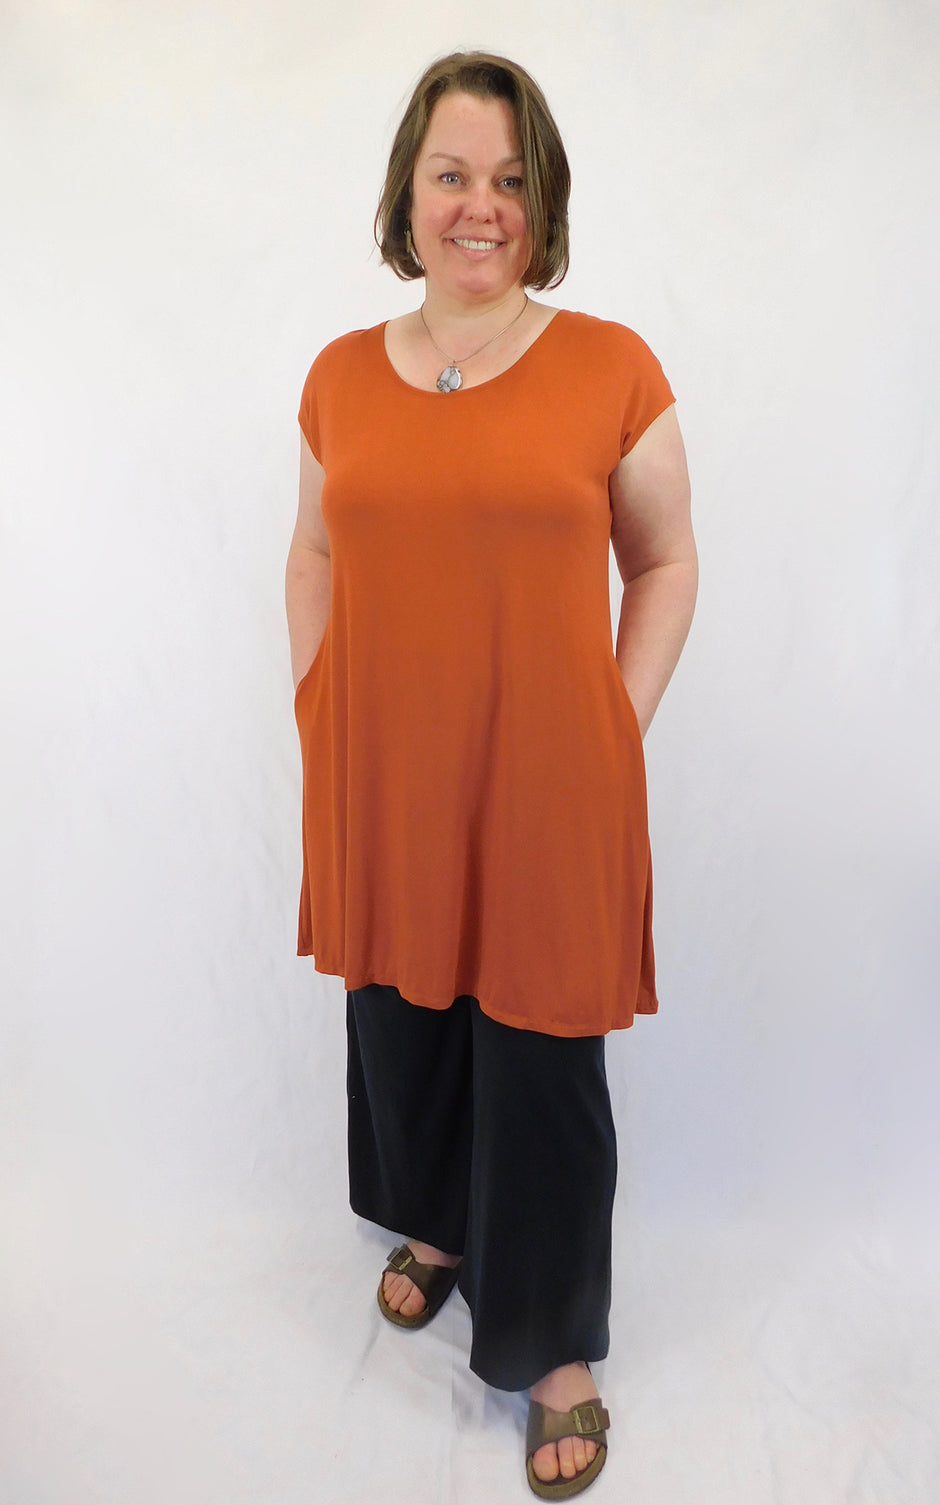 Brenda Laine Designs - Sustainable Fashion, Locally Made